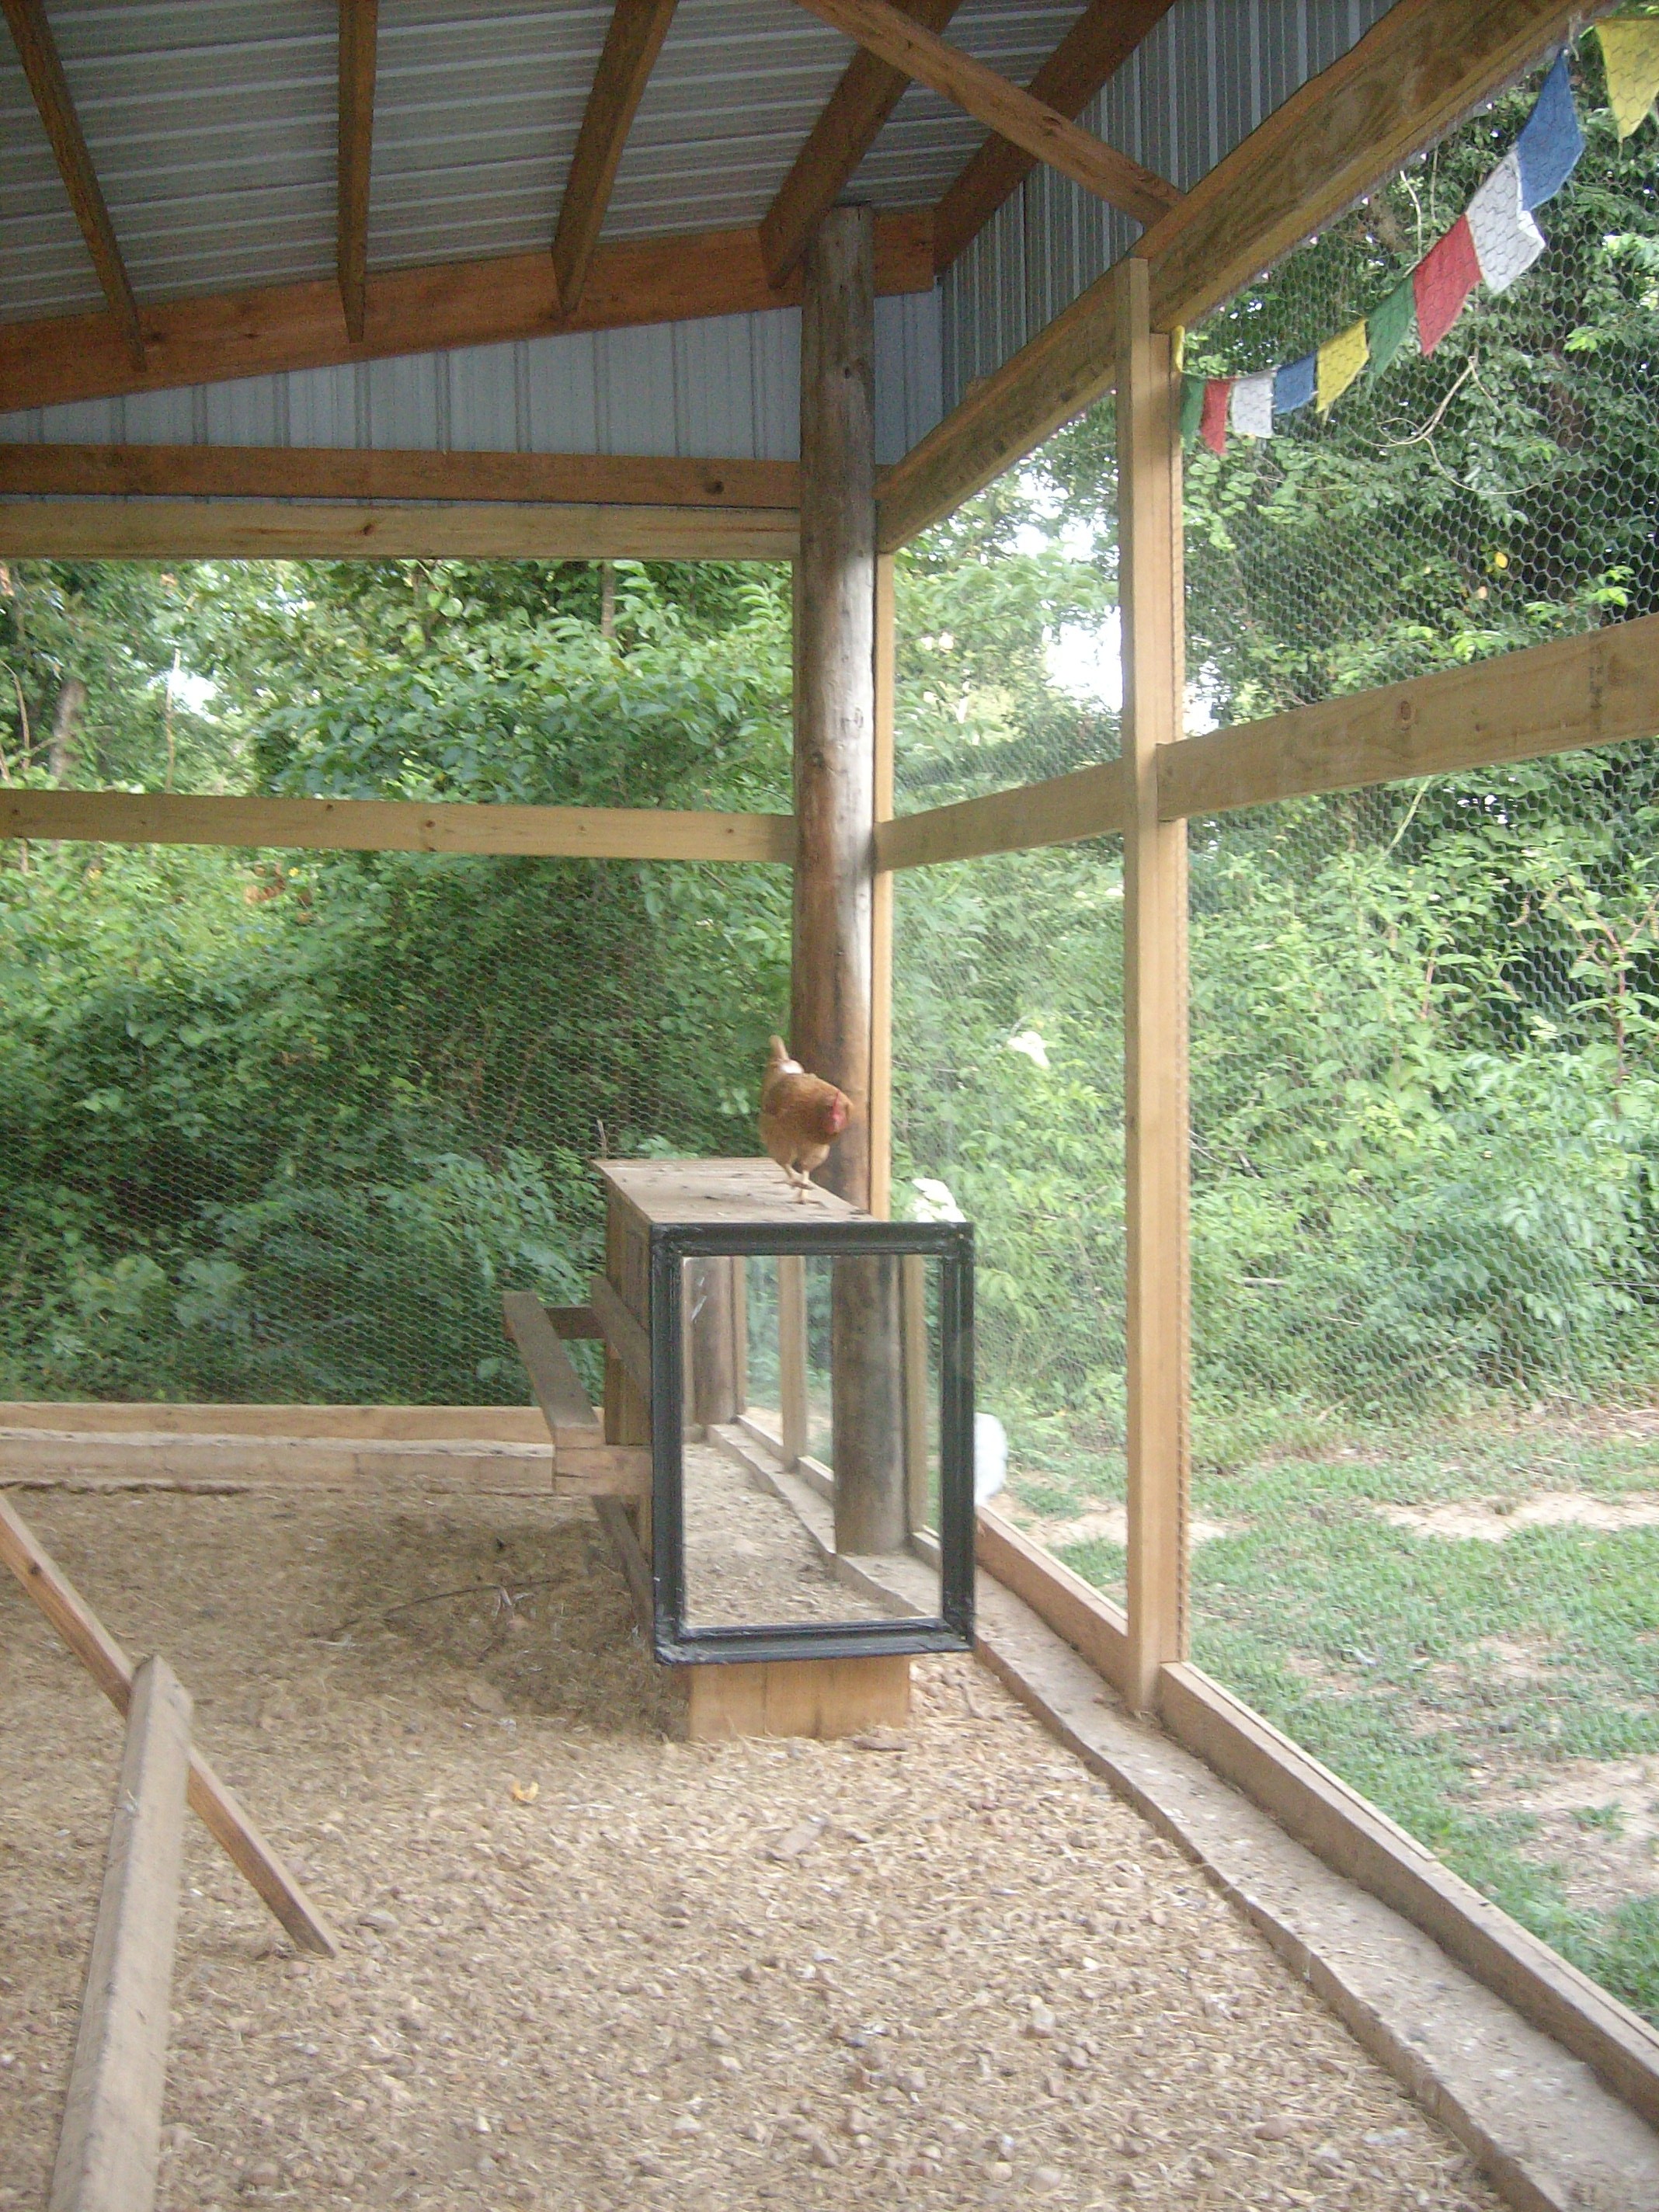 Mirror in the living area, mounted to the side of the nest boxes.